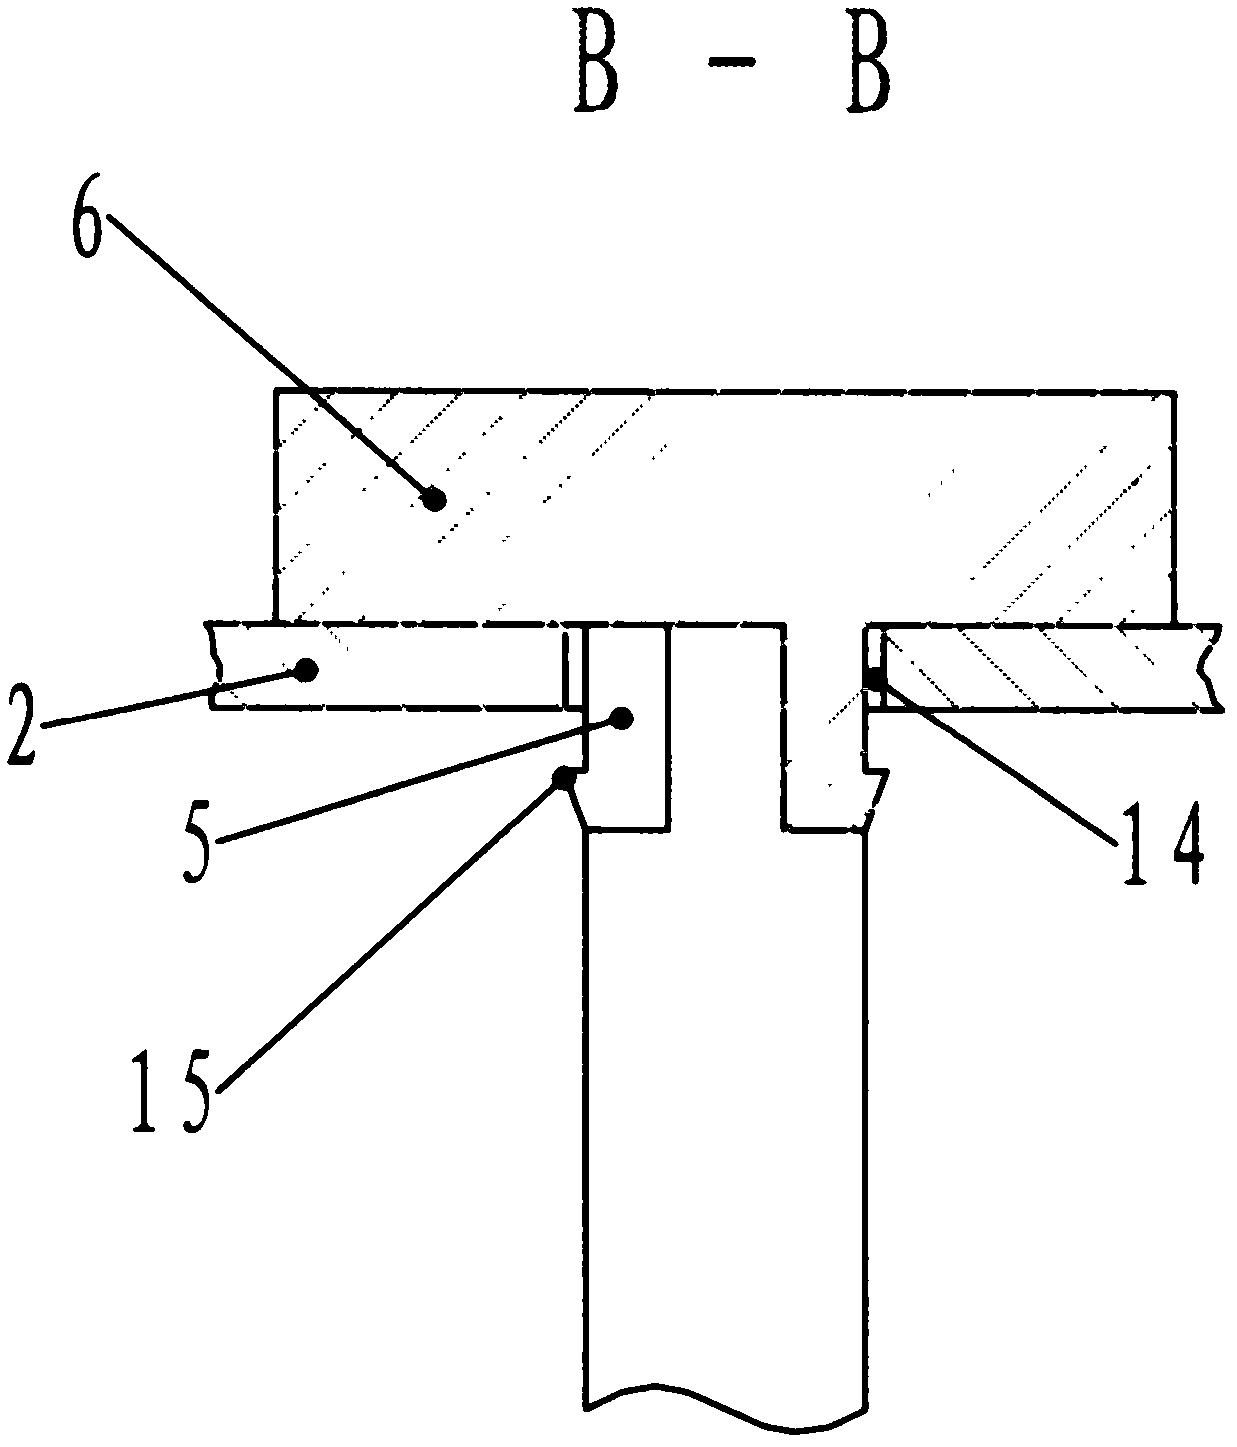 Magnetism adjusting device mounted on body of magnetic glass wiper